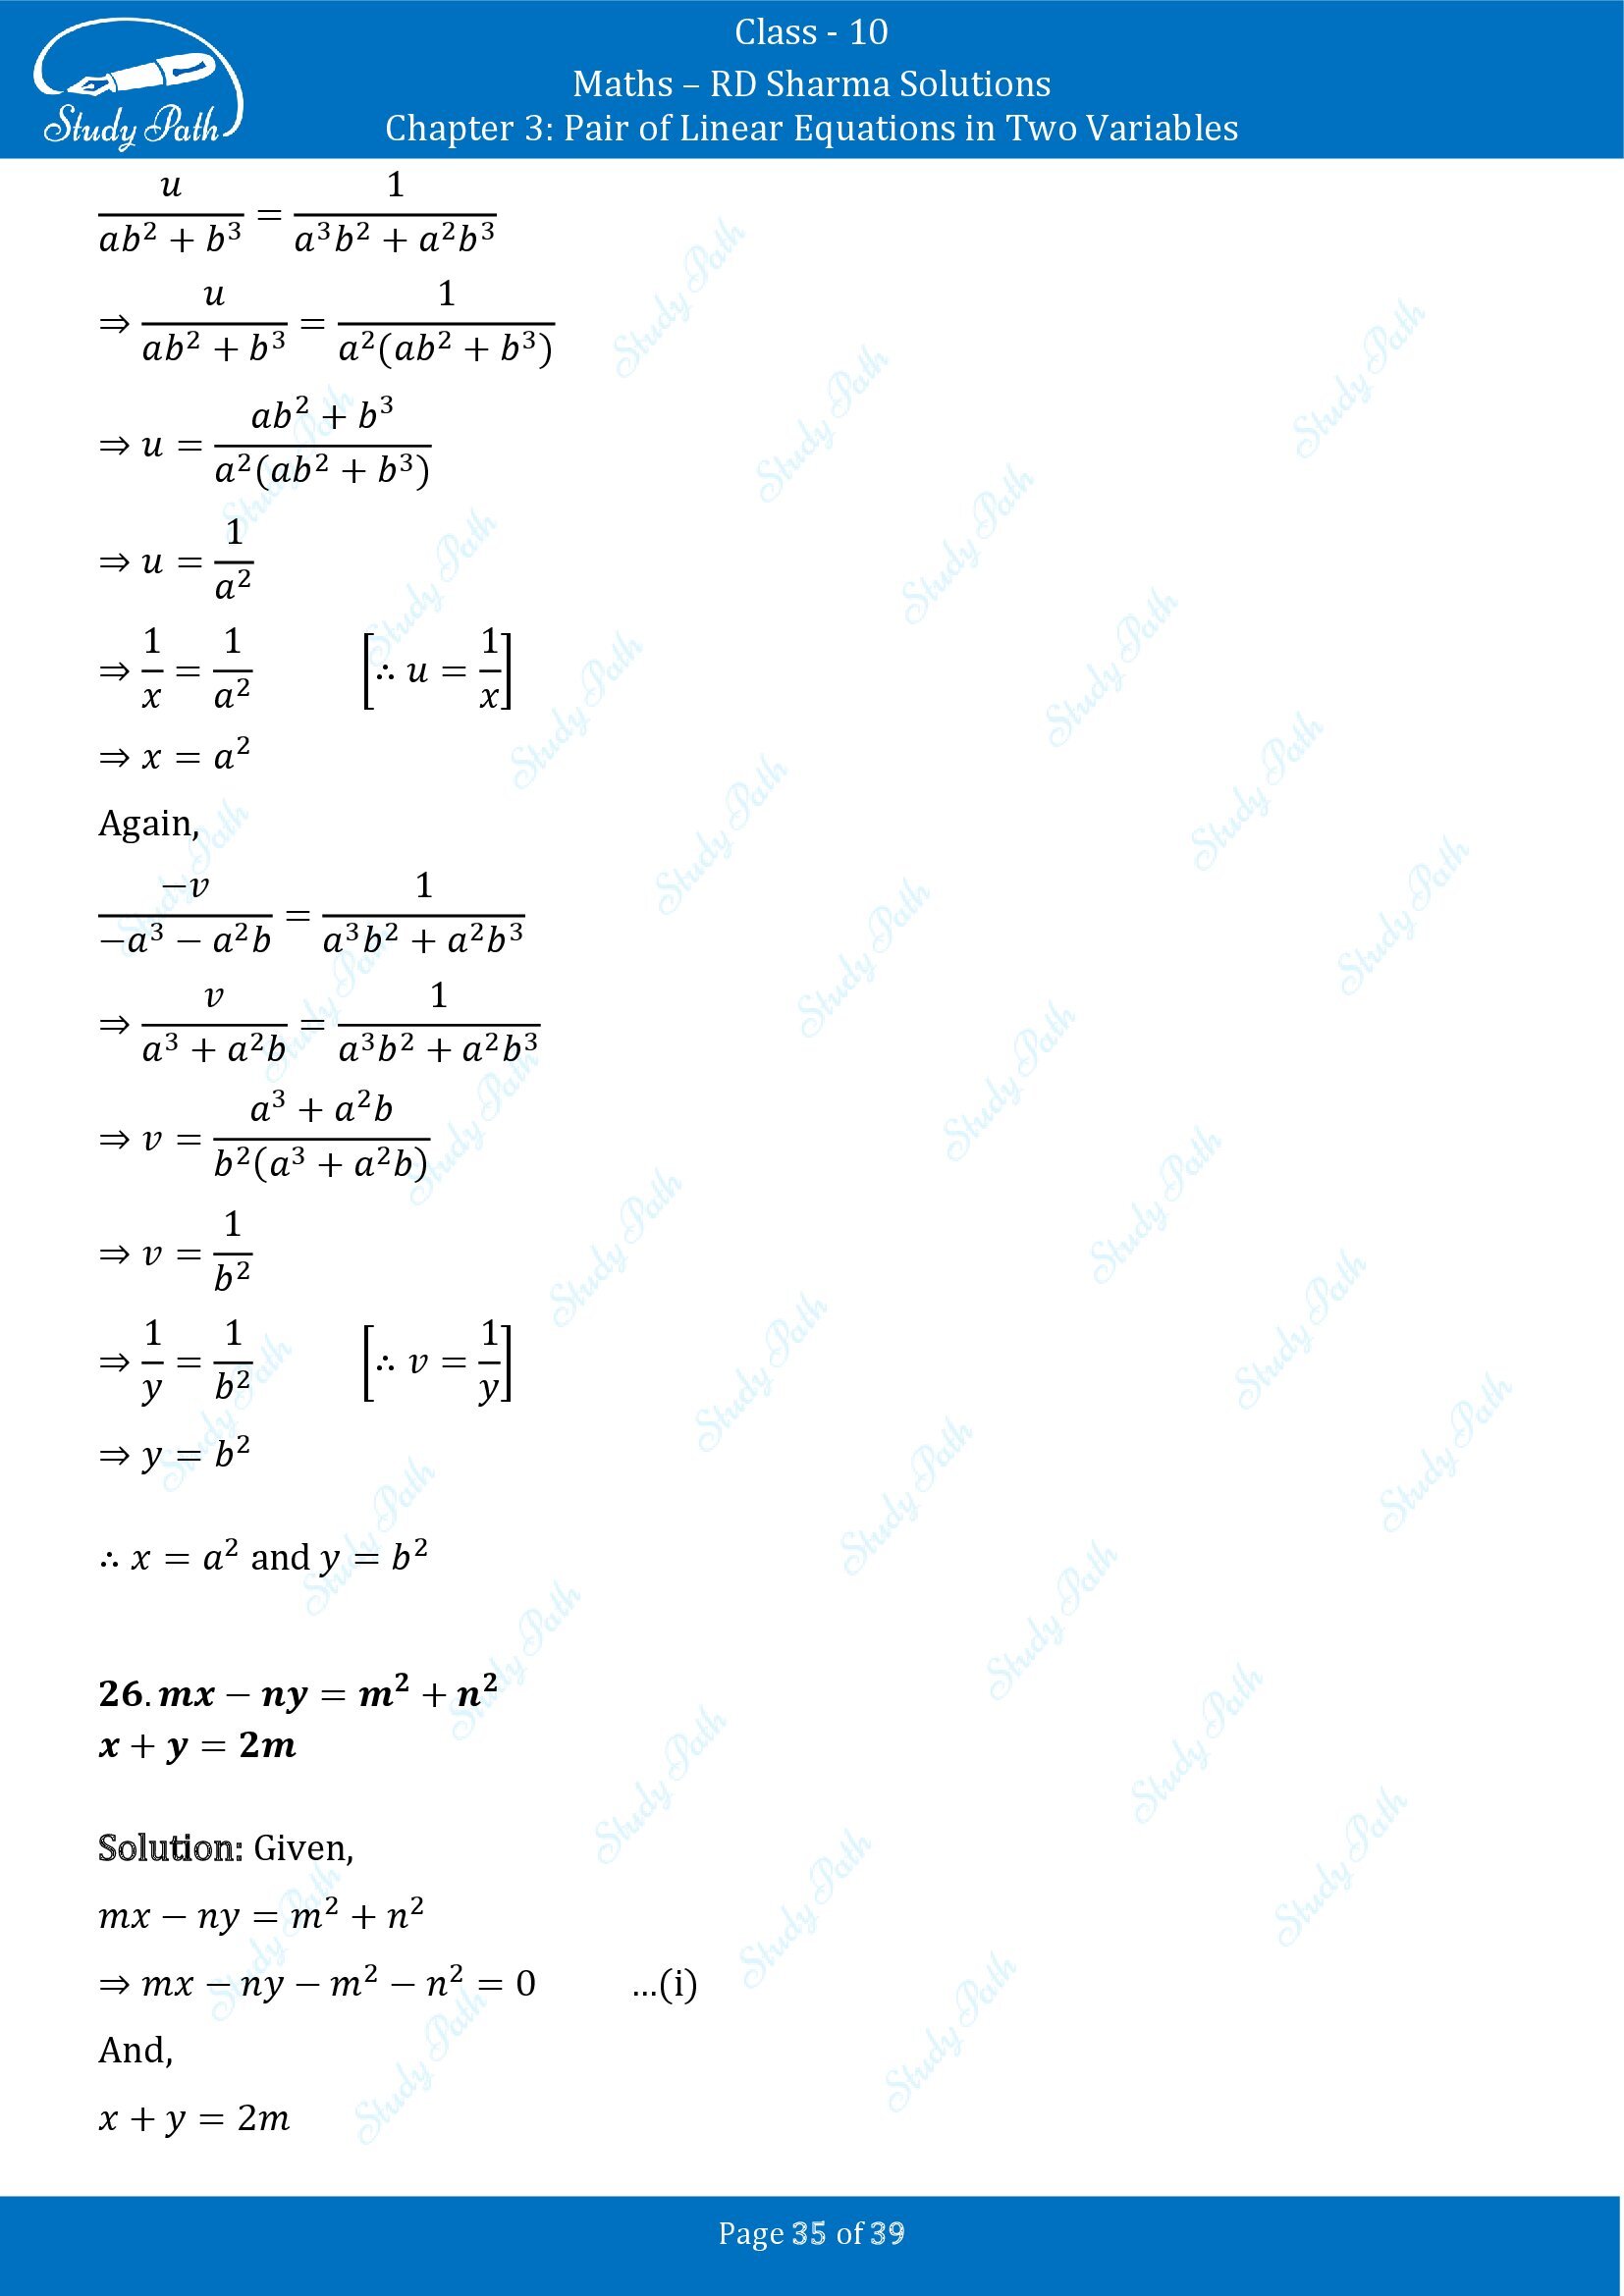 RD Sharma Solutions Class 10 Chapter 3 Pair of Linear Equations in Two Variables Exercise 3.4 00035